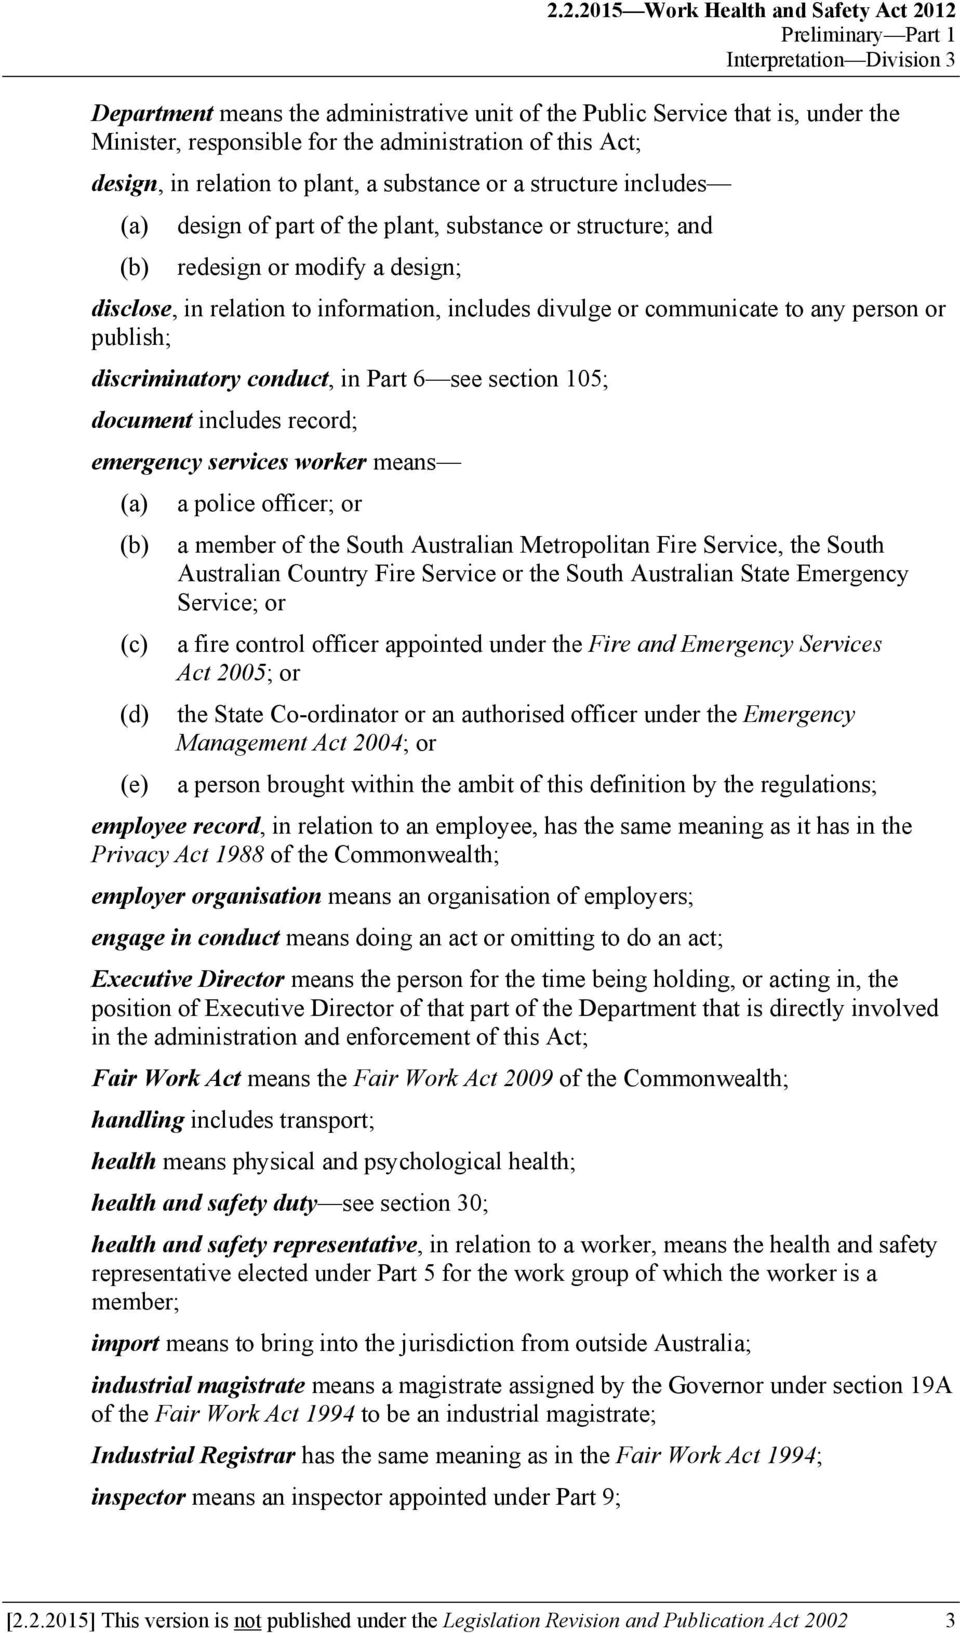 relation to information, includes divulge or communicate to any person or publish; discriminatory conduct, in Part 6 see section 105; document includes record; emergency services worker means a